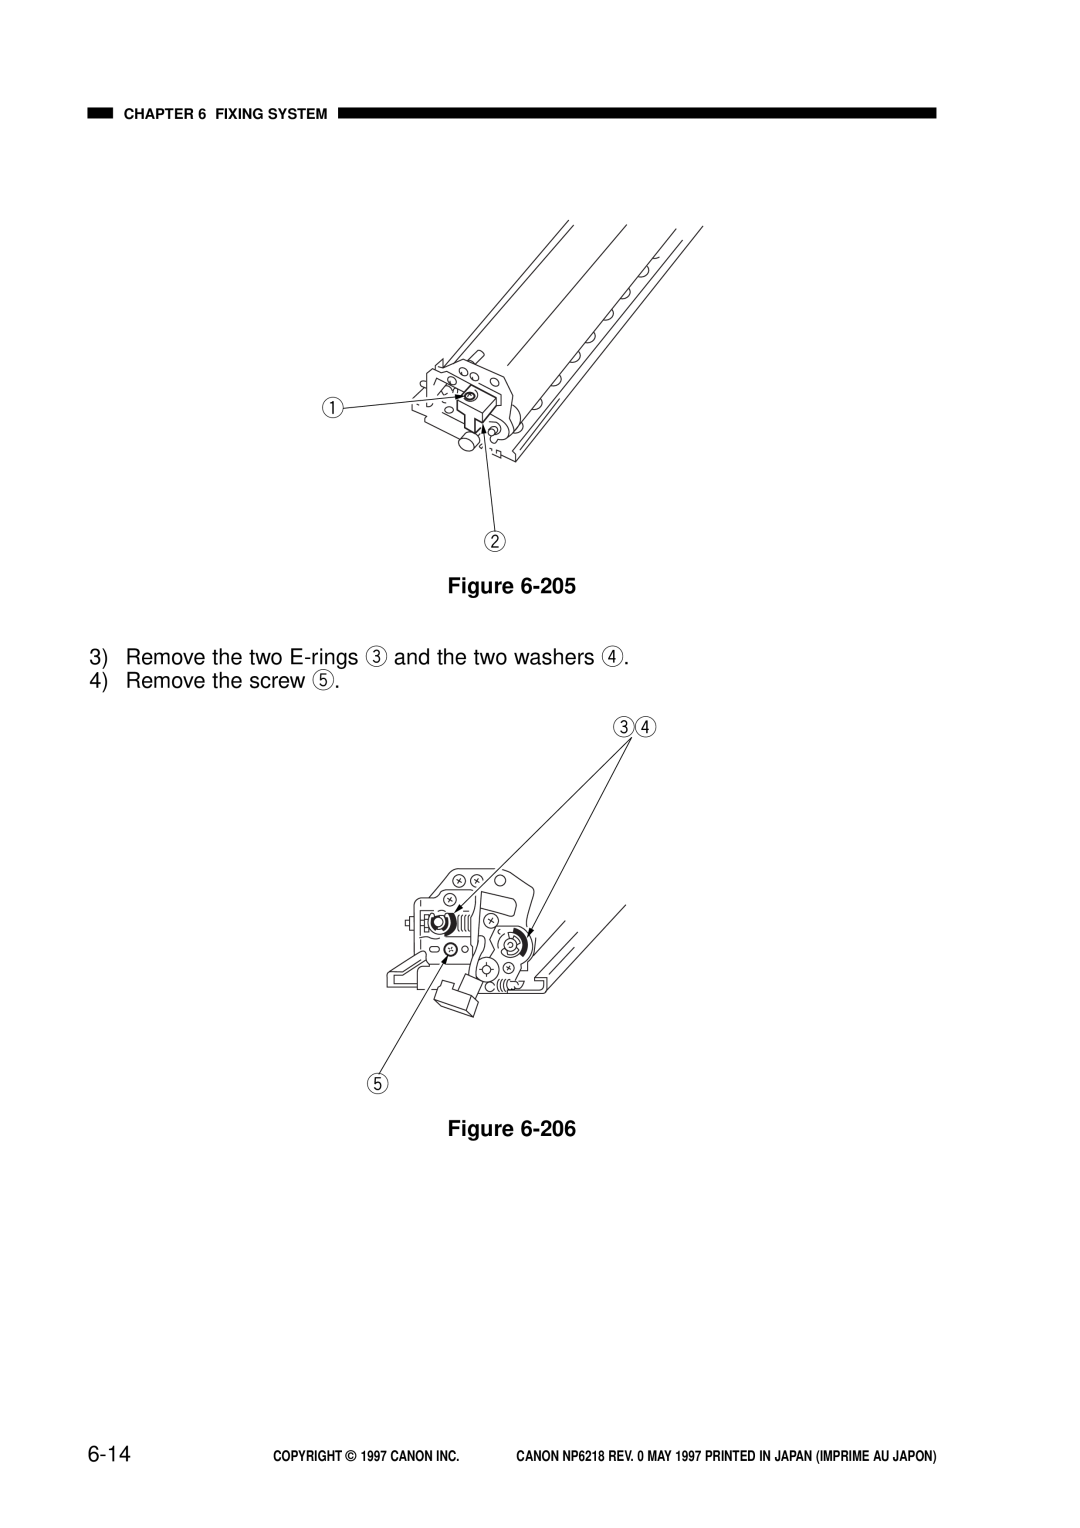 Canon NP6218, FY8-13EX-000 service manual er t, 6-14, Fixing System, COPYRIGHT 1997 CANON INC 